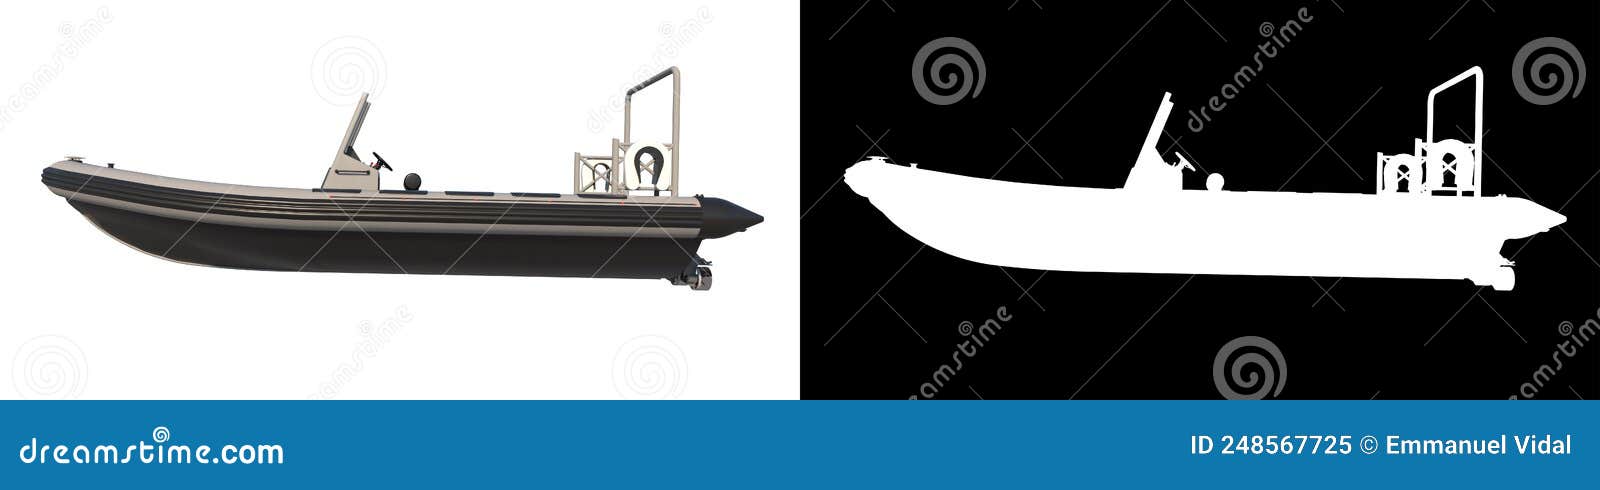 ship inflatable boat 2 - lateral view white background alpha png 3d rendering ilustracion 3d